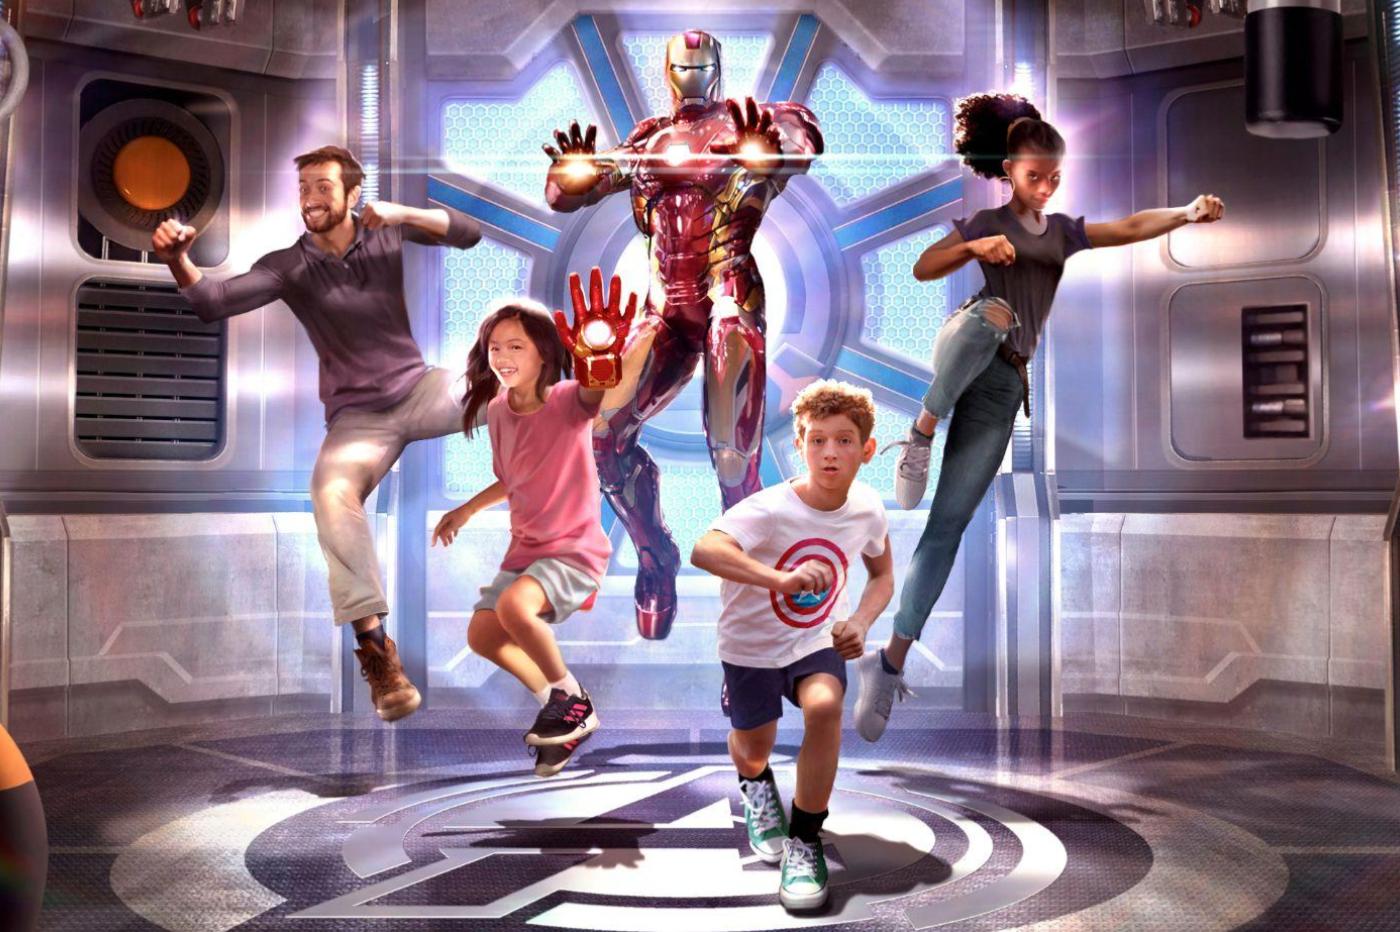 Promotional image of the meeting point with Iron Man